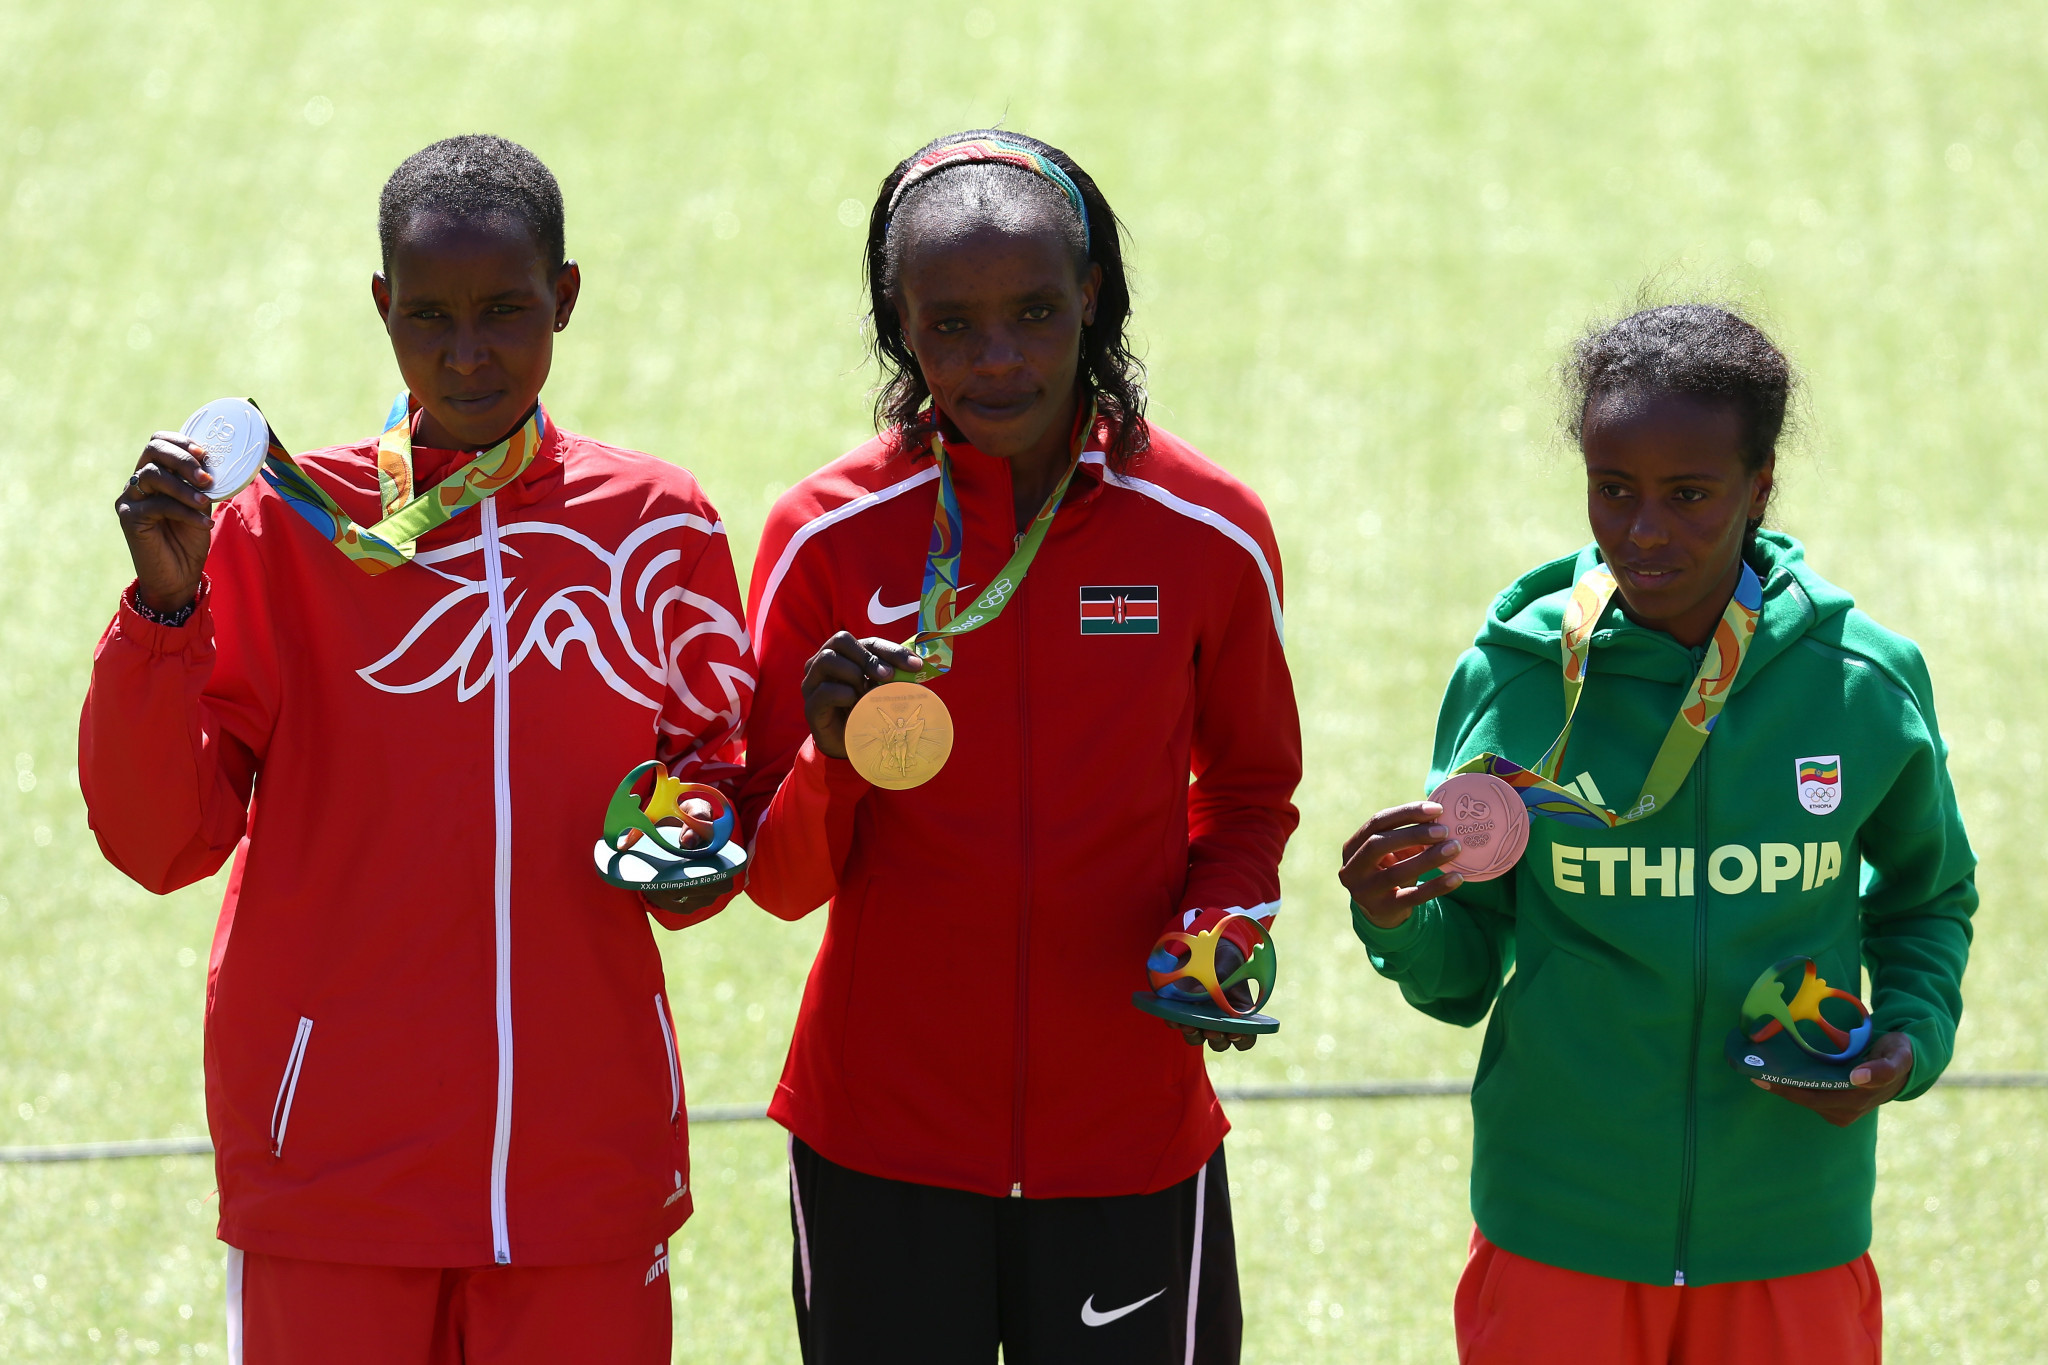 Both the gold and silver medallists in the women's marathon at Rio 2016 have now been implicated in doping following news that Eunice Kirwa, left,was provisionally suspended after testing positive for EPO, joining Kenya's Jemima Sumgong, centre, the winner, already banned for eight years ©Getty Images